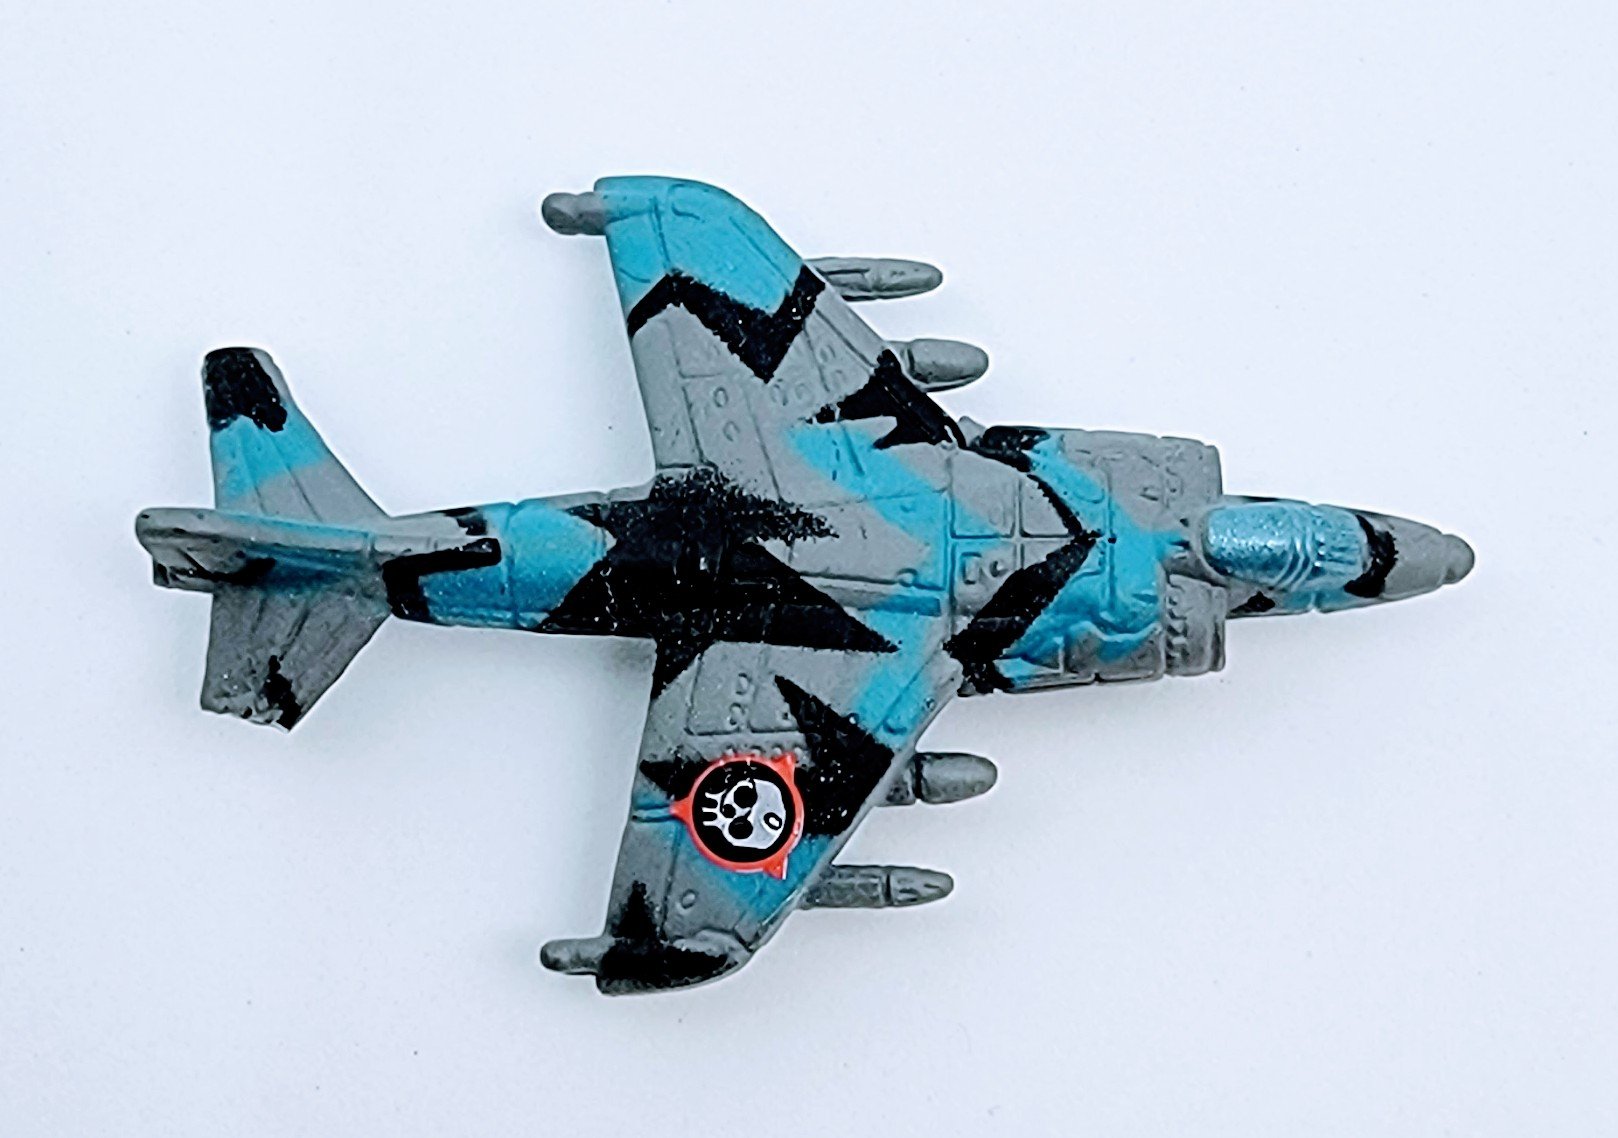 Micro Machines Military AV-8B SeaHarrier VTOL Terror Troops Blue, Gray, and Black Camo Miniature Toy MMAC2 simple Xclusive Collectibles   